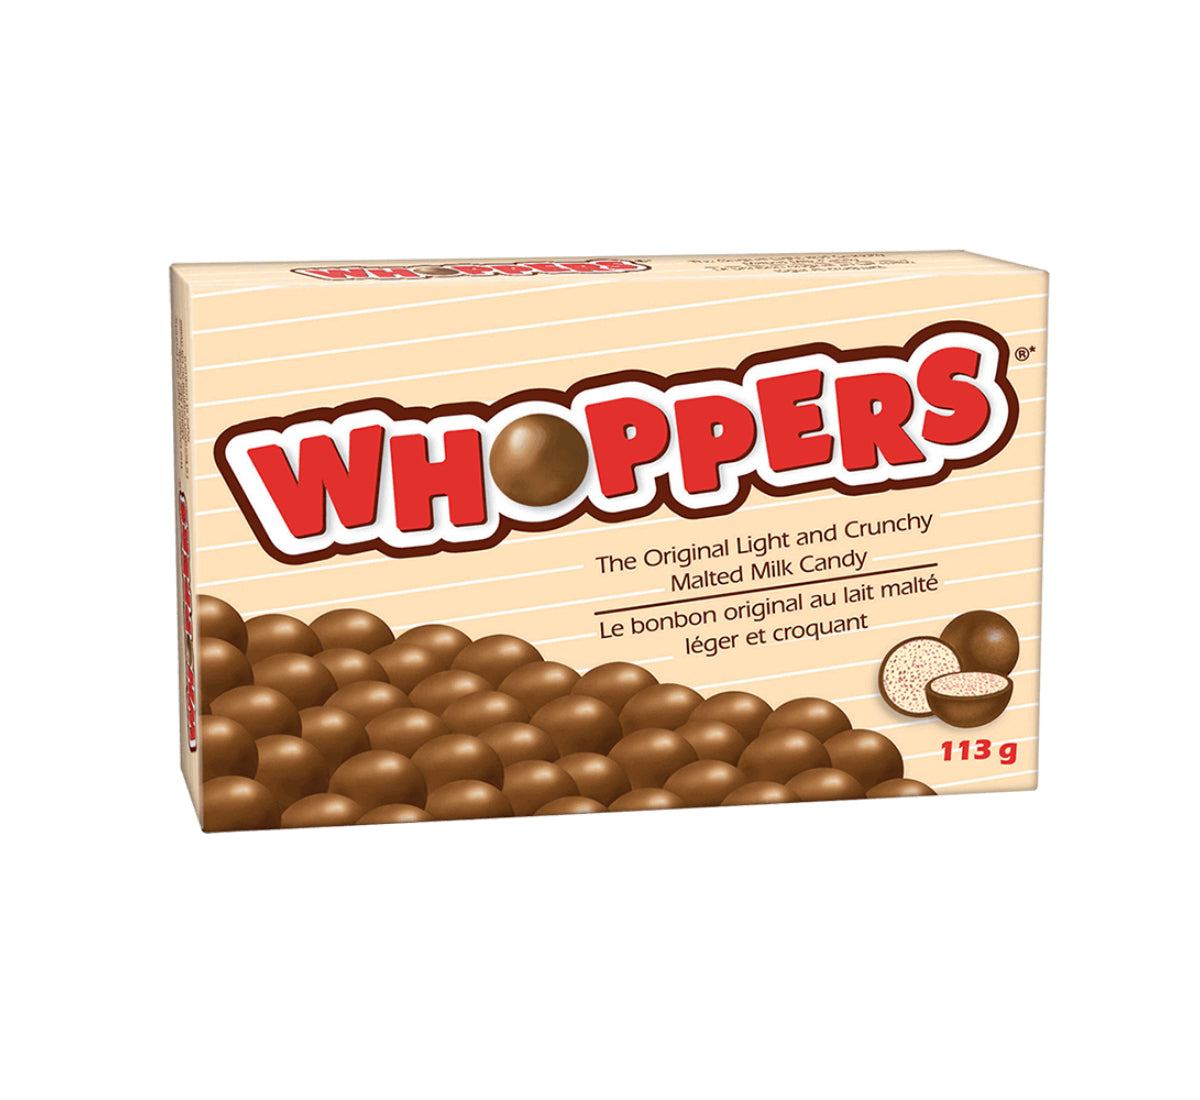 Whoppers Malted Milk Original Candy 113g (12 pack)